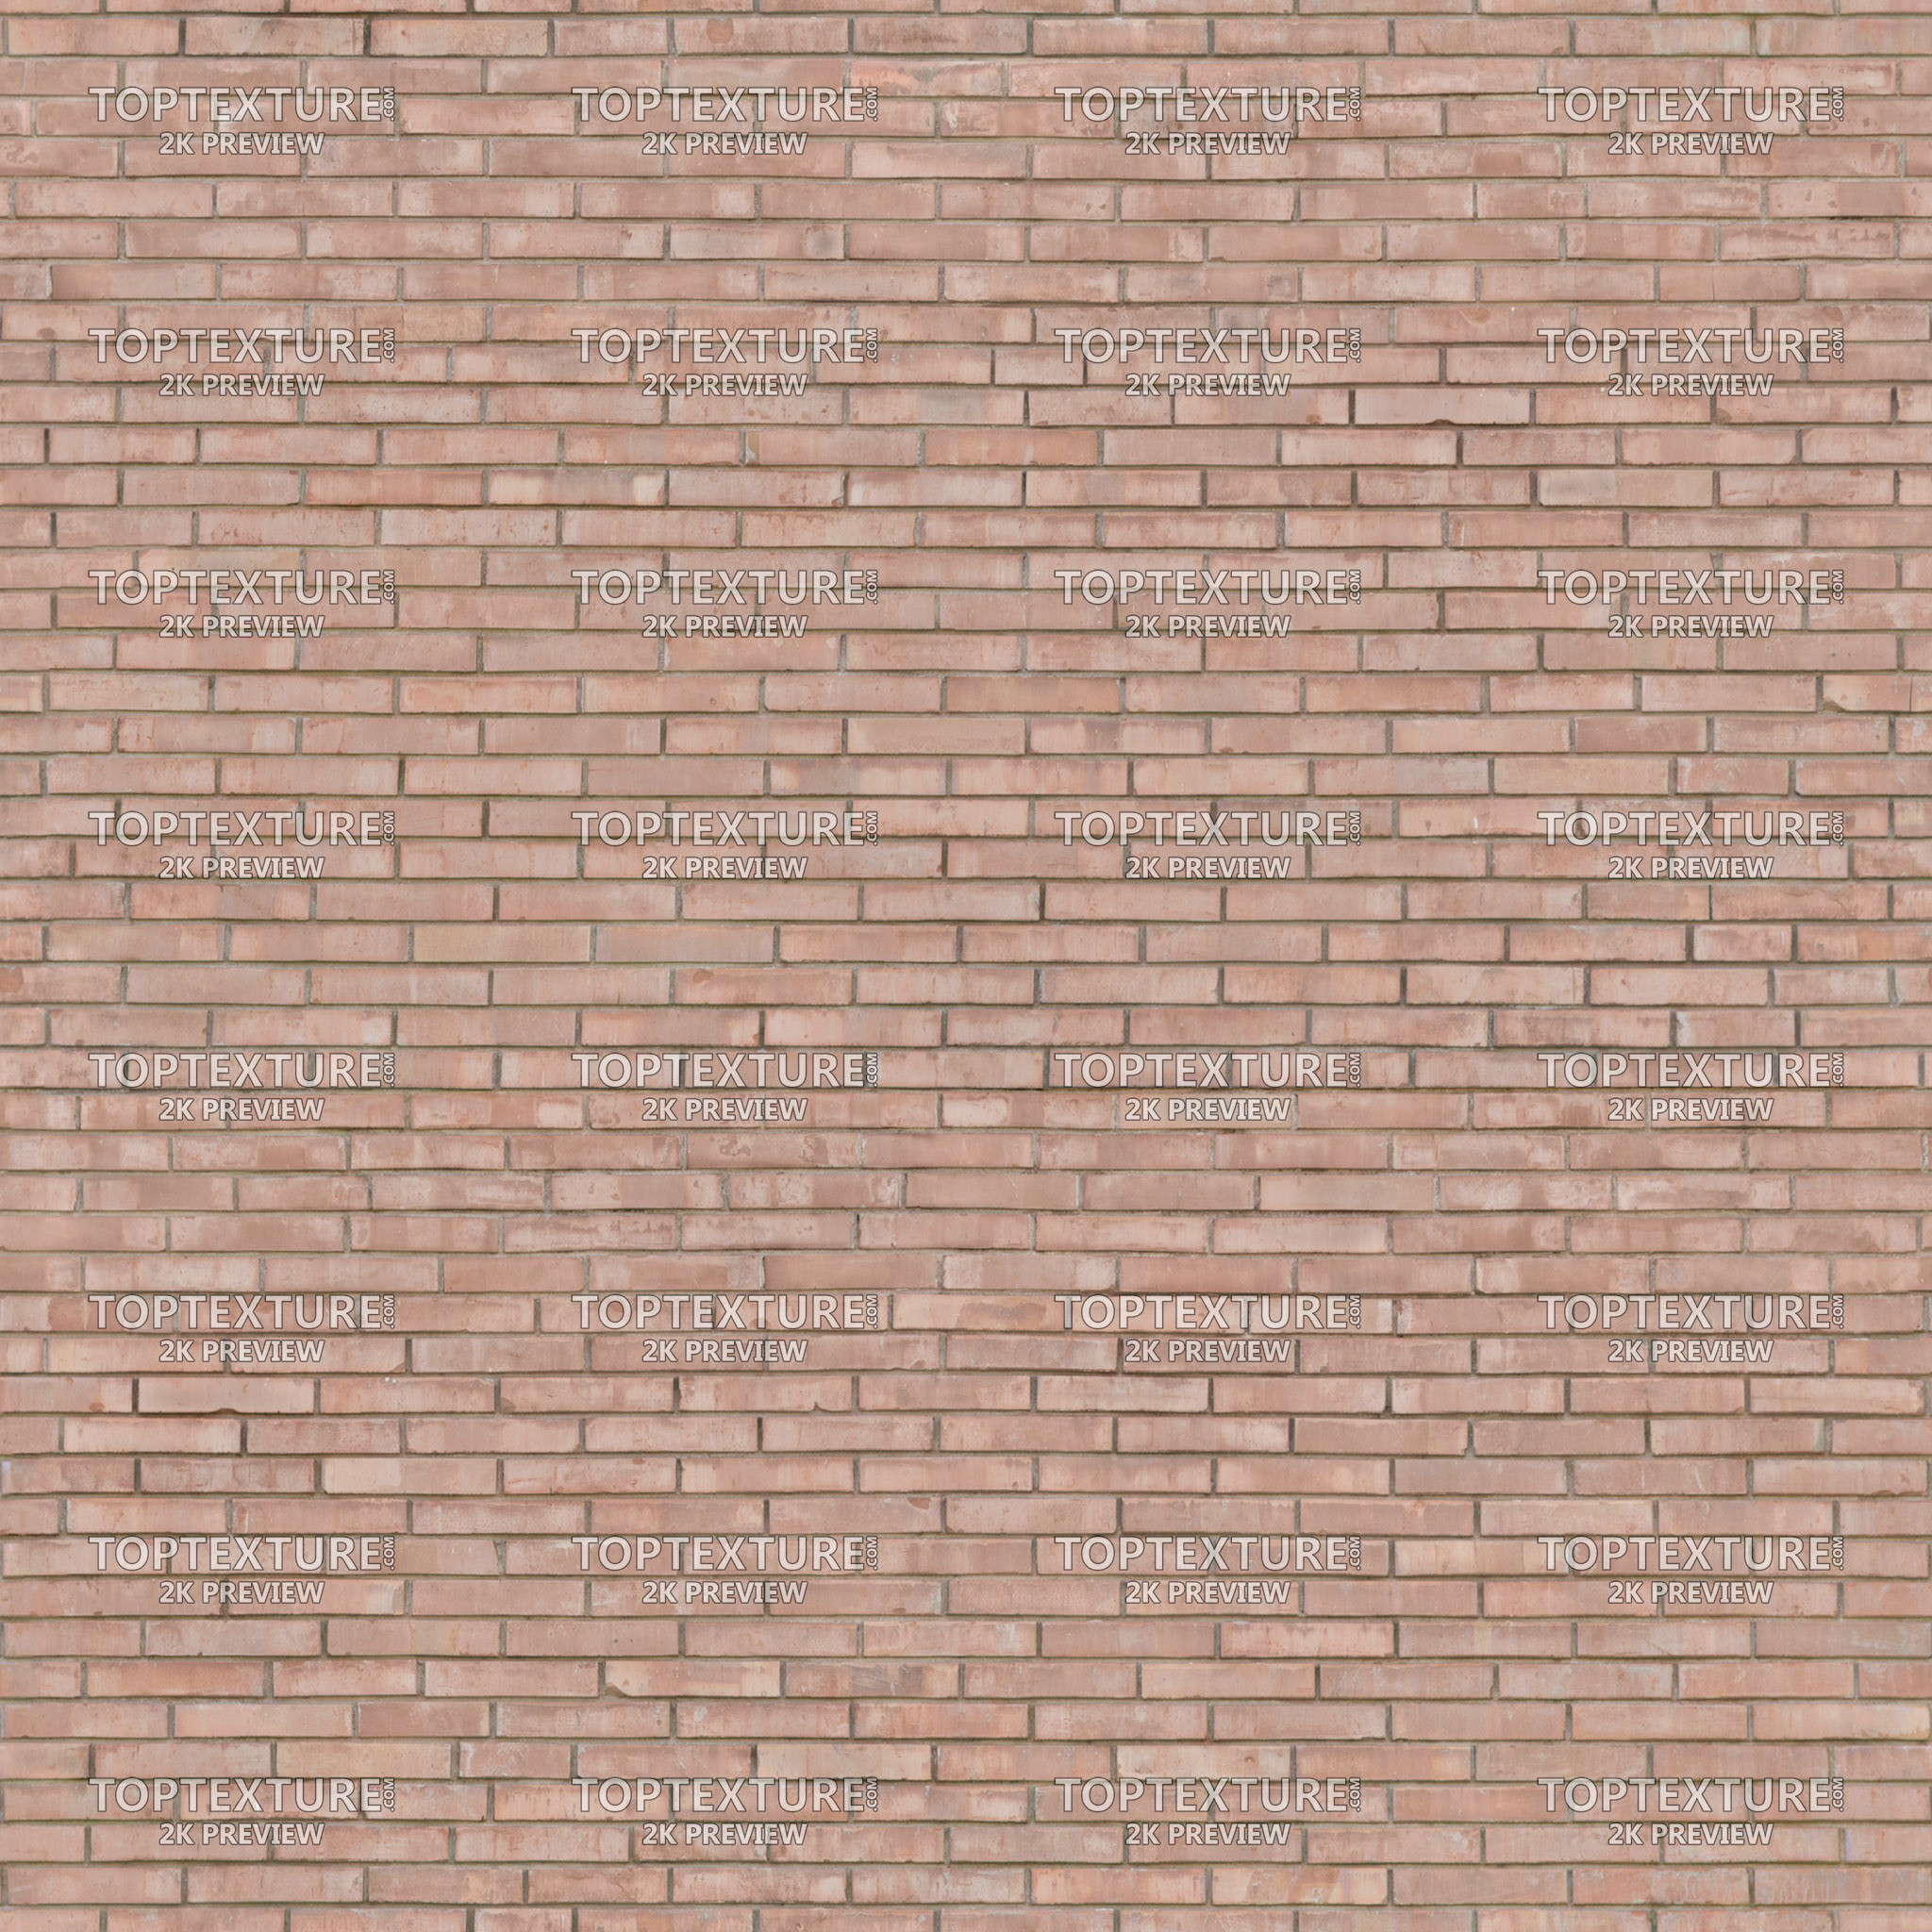 Mostly Clean Wall Bricks - 2K preview